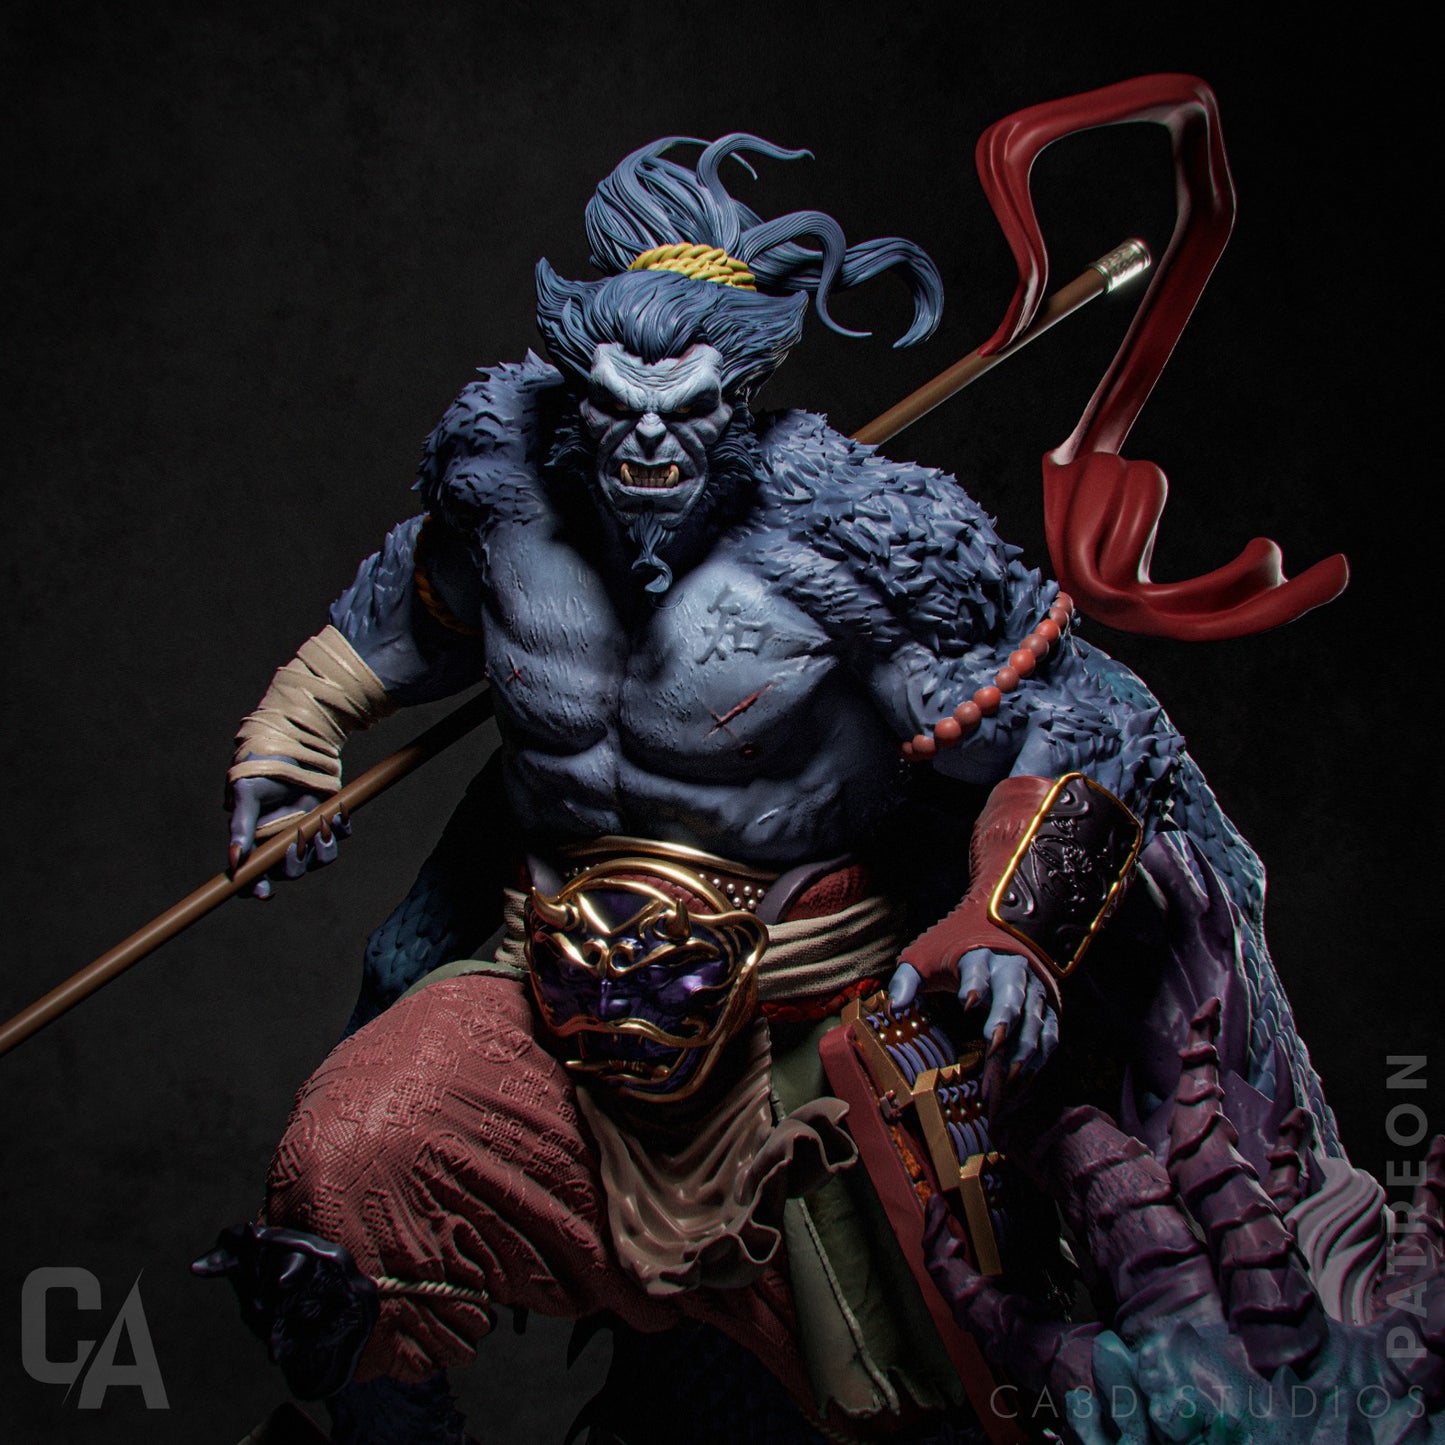 
                  
                    Samurai Beast - Collectible Statue by CA3D studios - unpainted or painted versions
                  
                